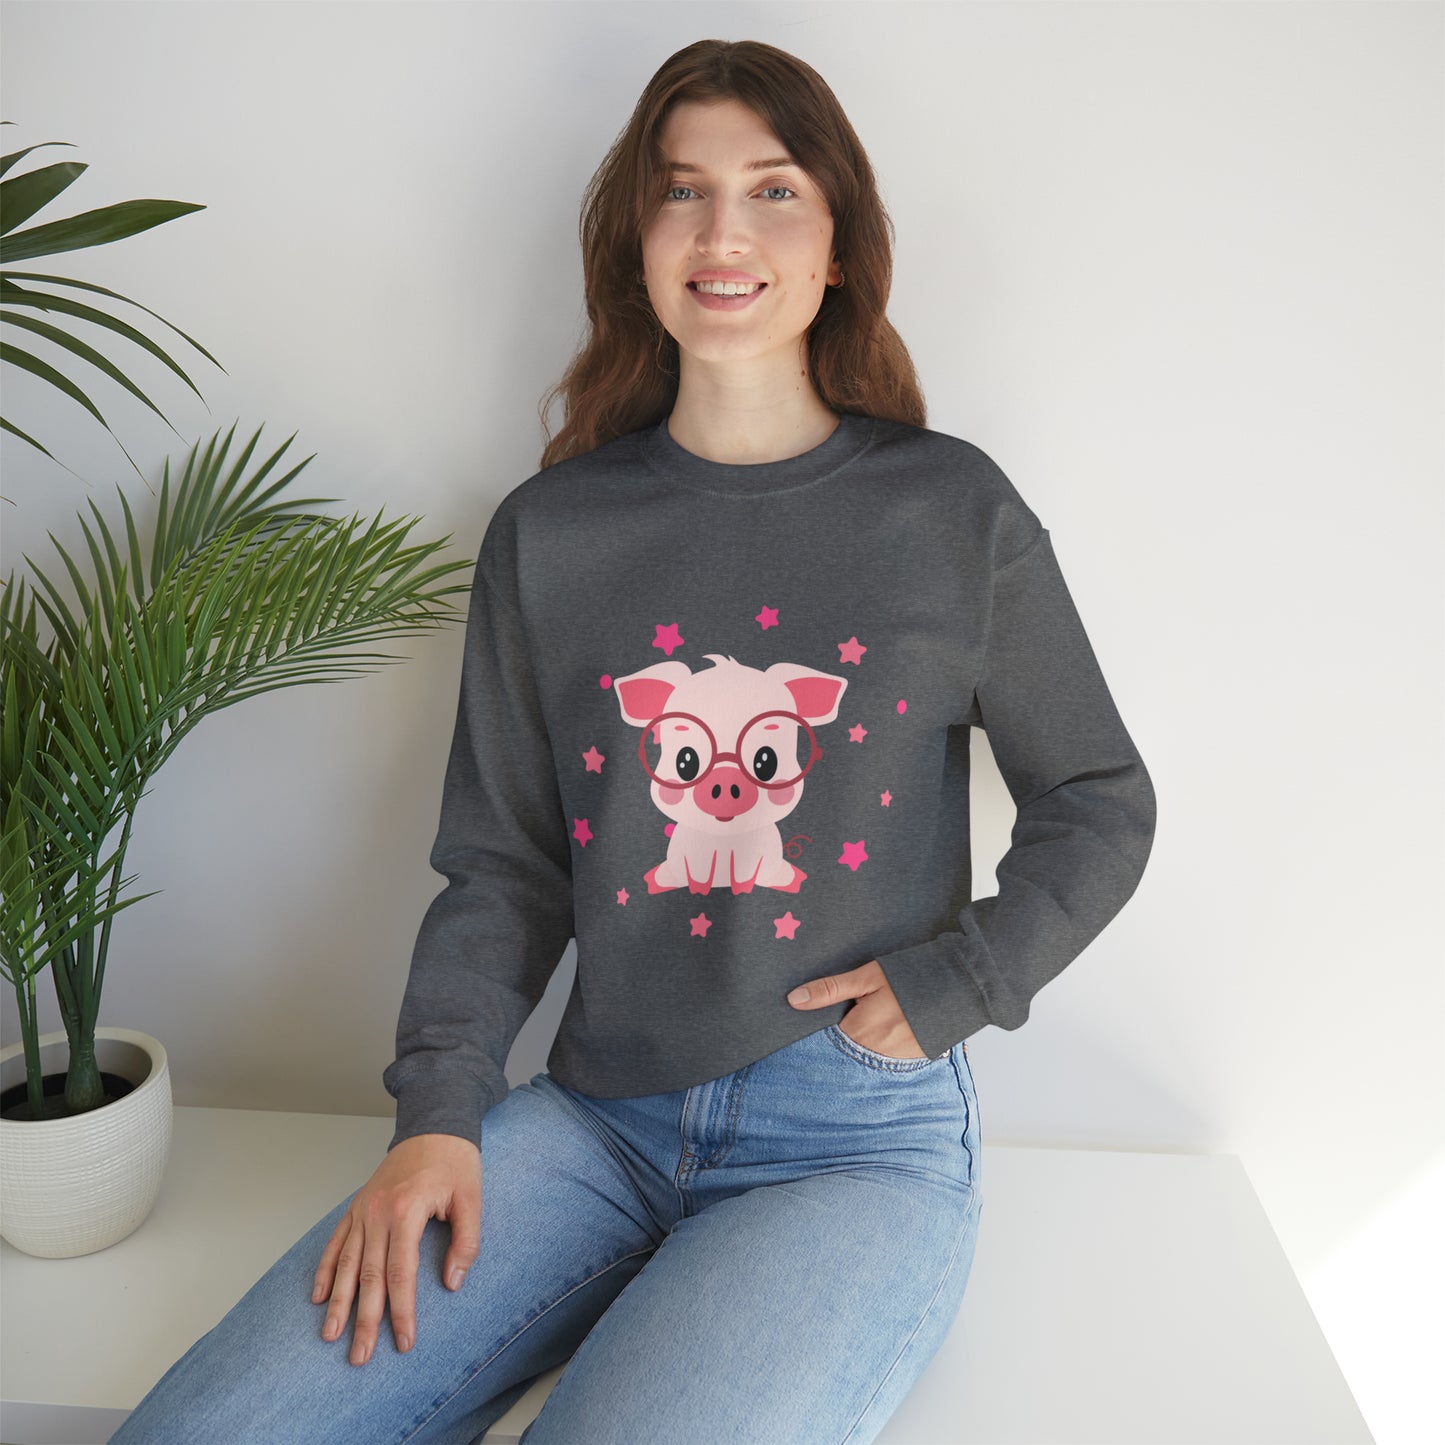 Enjoy this adorable, cozy and bright piggy design! Give the gift of this Unisex Heavy Blend™ Crewneck Sweatshirt or get one for yourself.